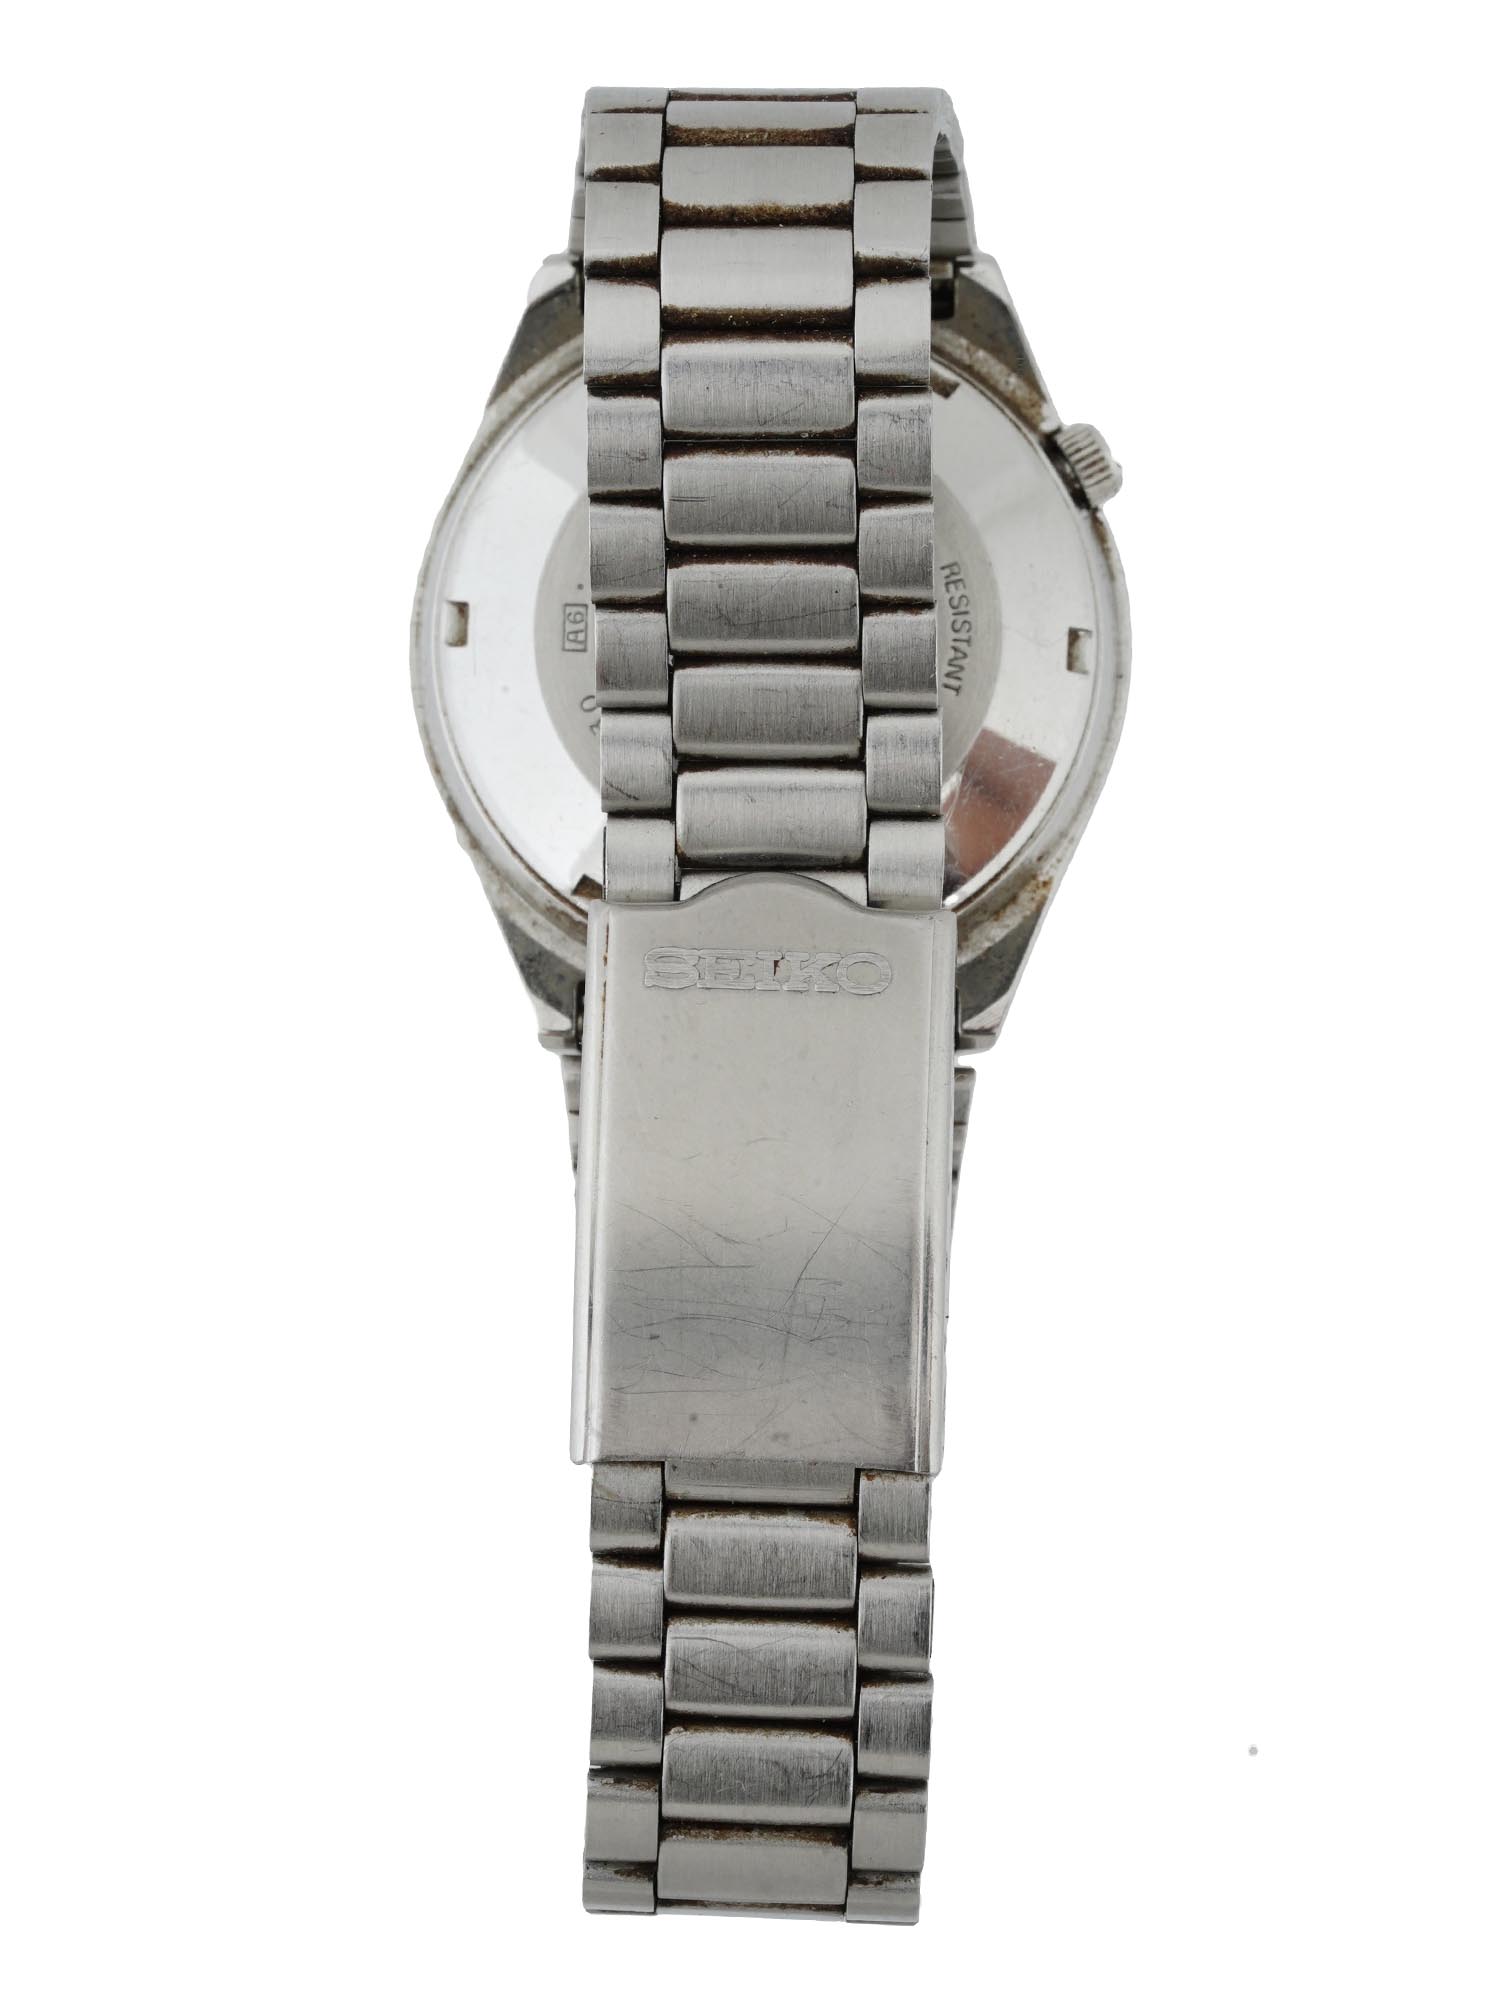 1980S SEIKO STAINLESS STEEL AUTOMATIC WRISTWATCH PIC-2